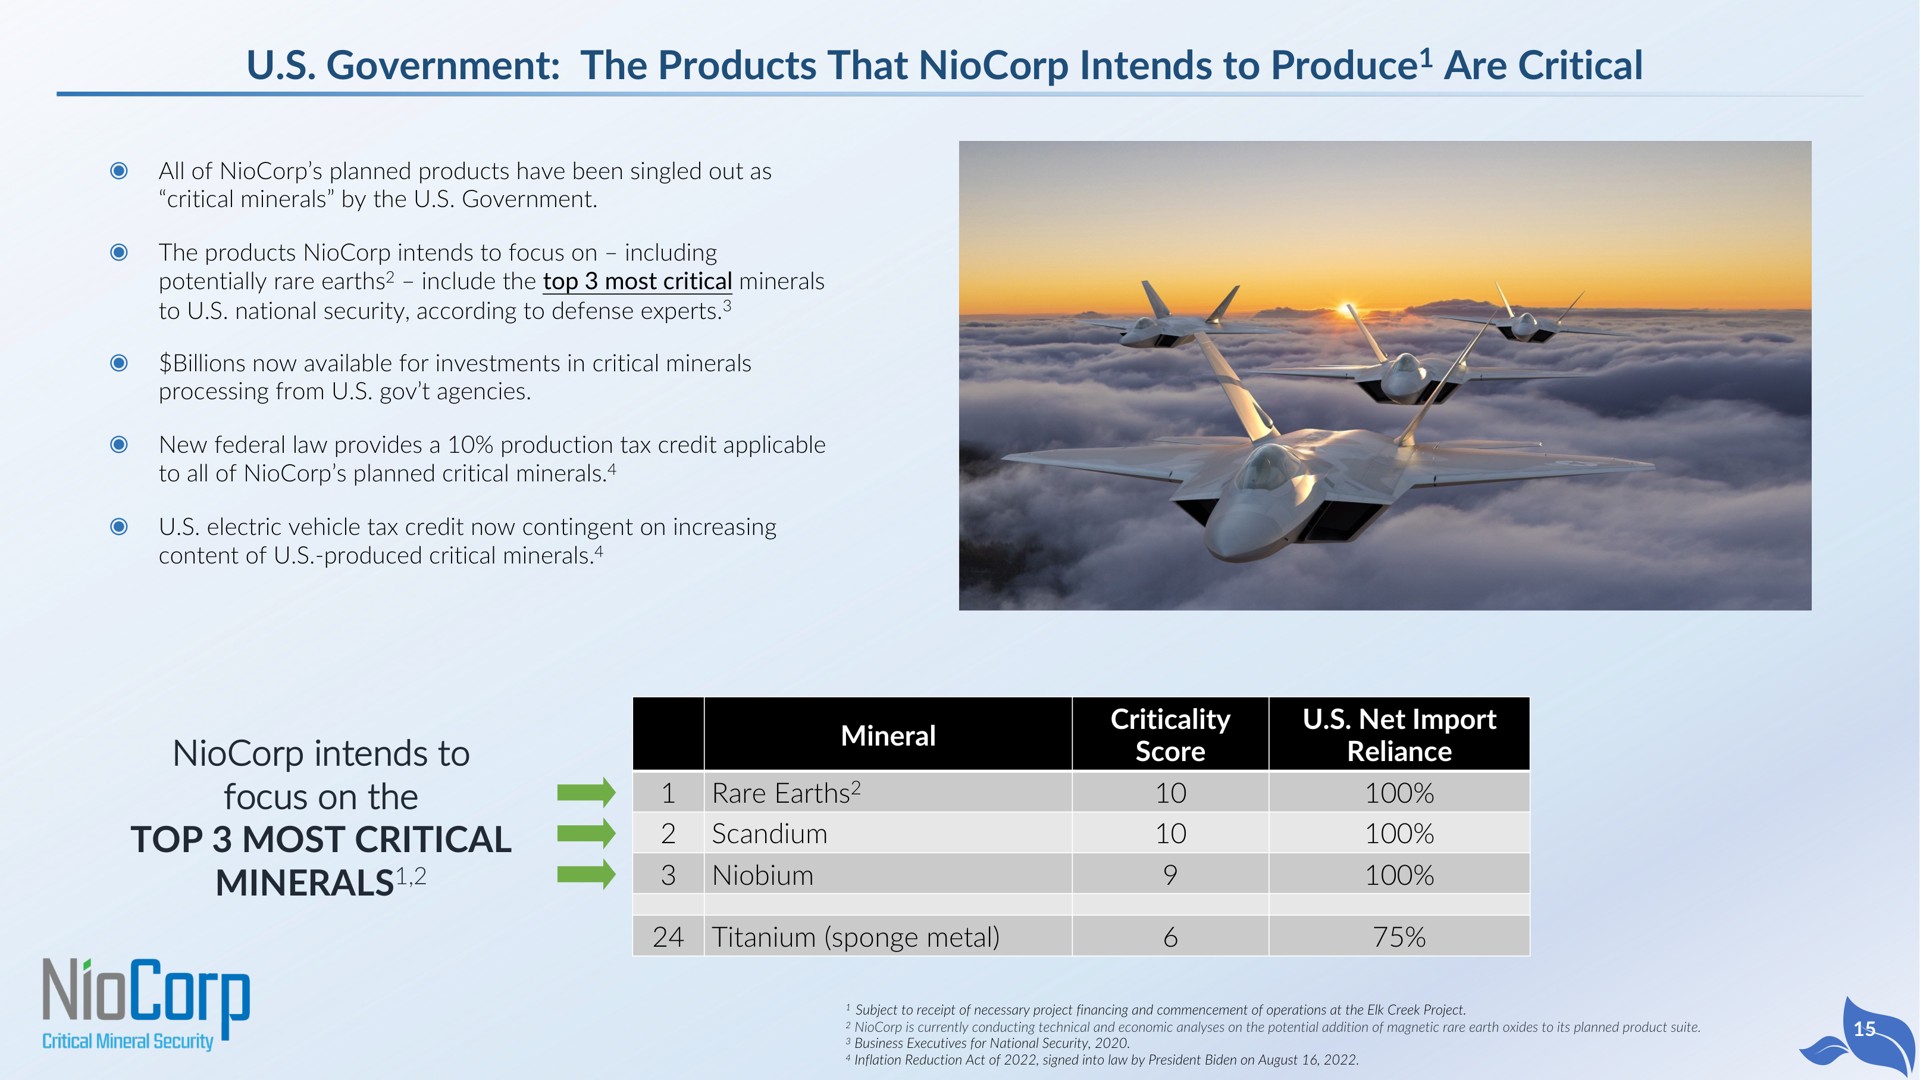 government the products that intends to produce are critical intends to focus on the top most critical minerals mineral rare earths scandium niobium criticality score net import reliance titanium sponge metal produce minerals earths seeks | NioCorp